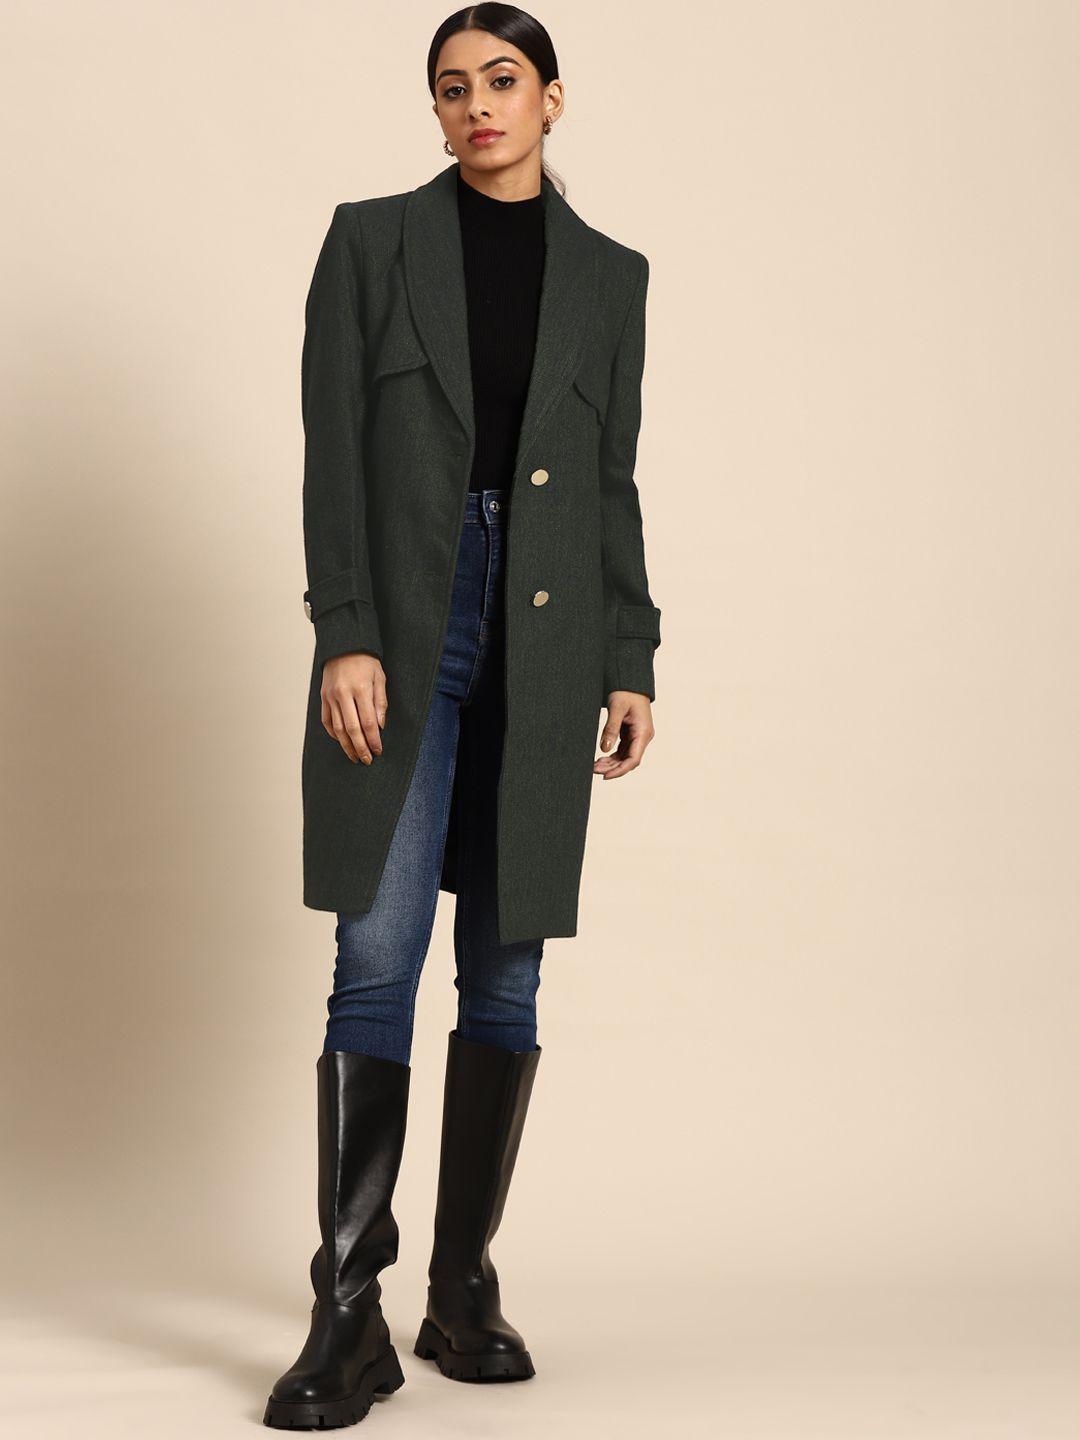 all-about-you-women-green-&-navy-houndstooth-pattern-longline-overcoat